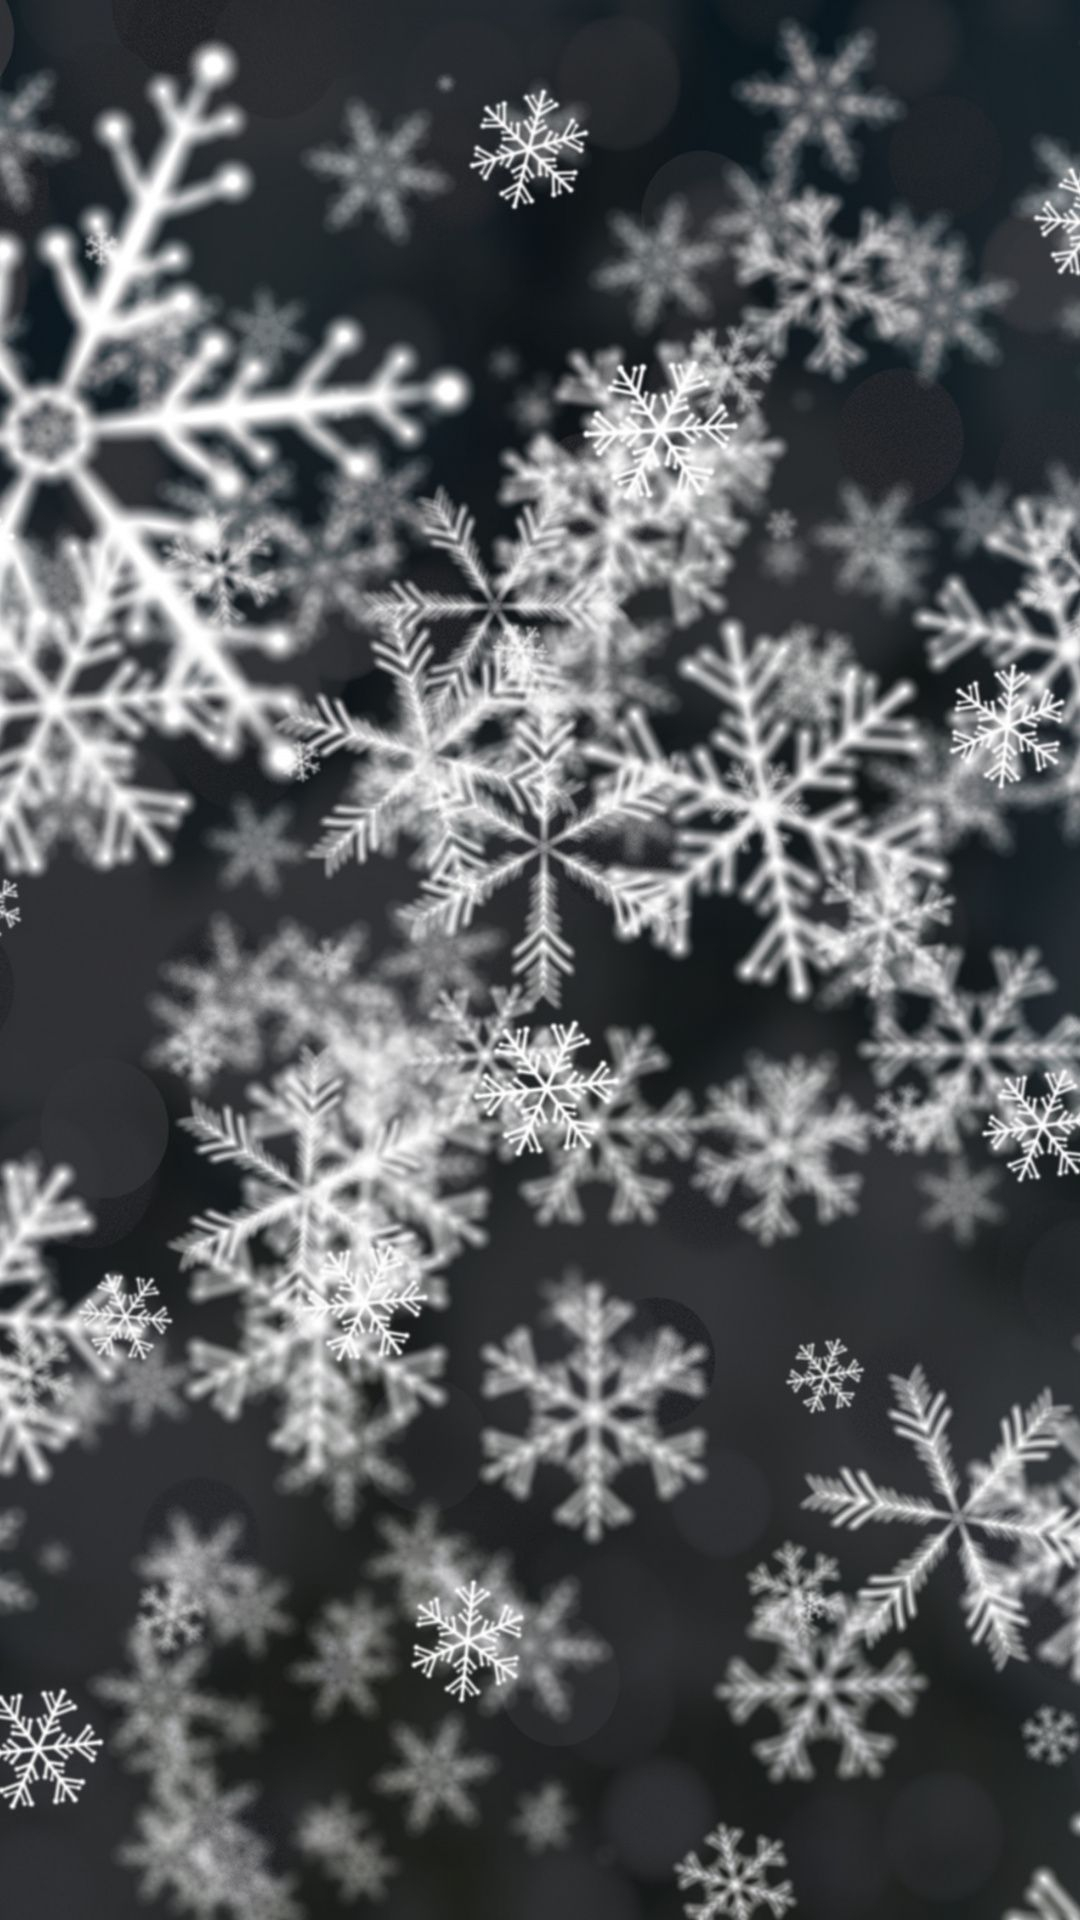 1080x1920 Snowflakes, abstract, digital art wallpaper | Sparkle wallpaper, Snowflake wallpaper, Christmas phone backgrounds